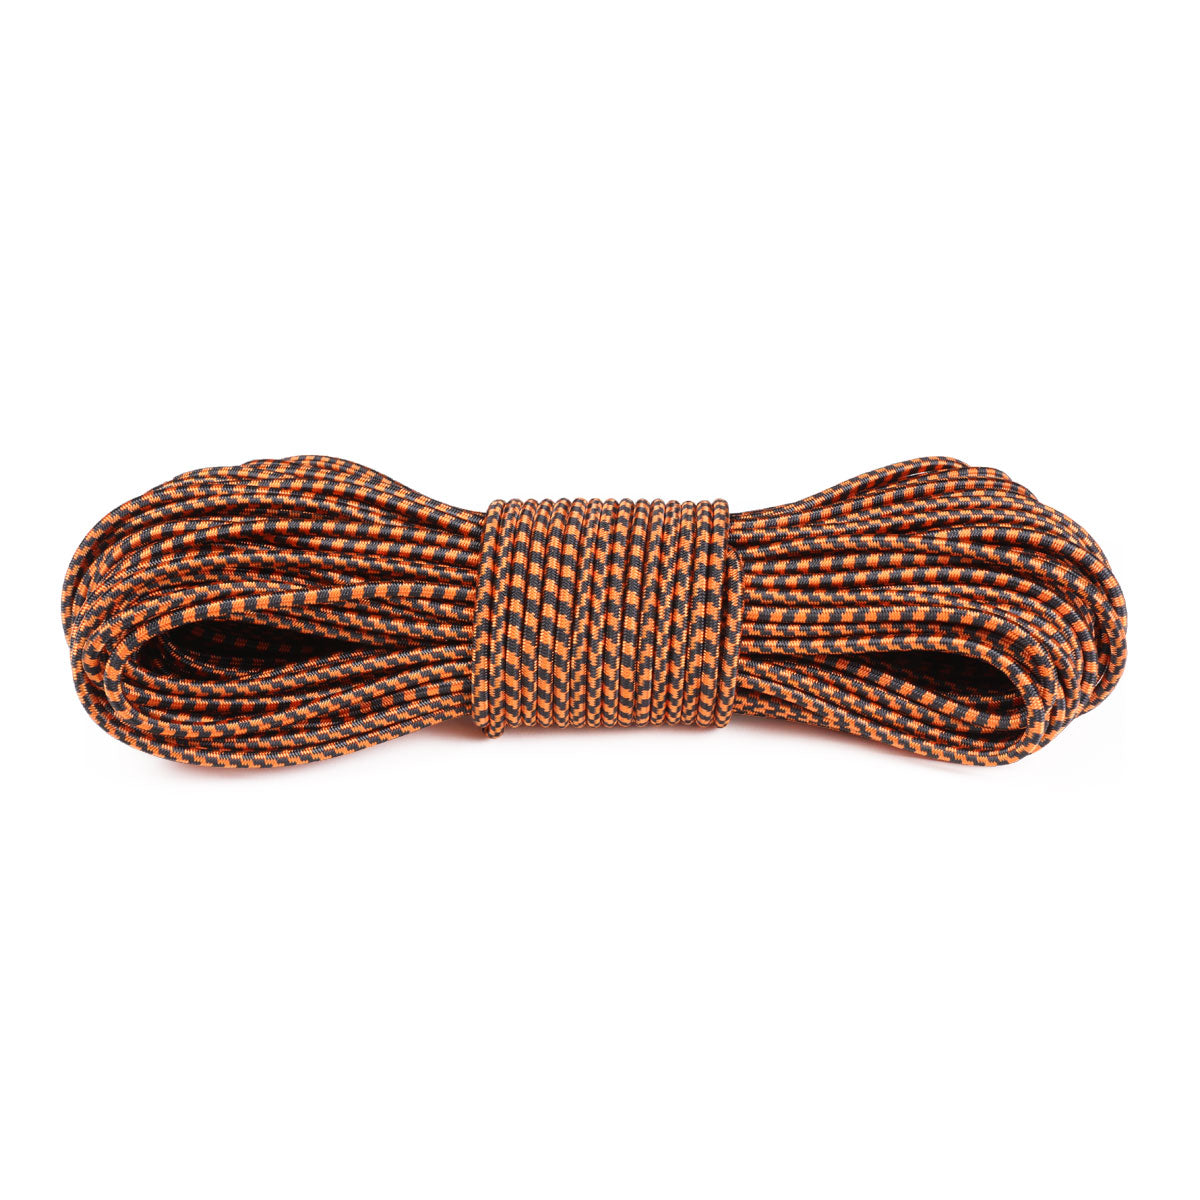 Bungee Cord  Buy Bungee Cords with Strong Bungee Cord Elastic - Atwood Rope  – Atwood Rope MFG